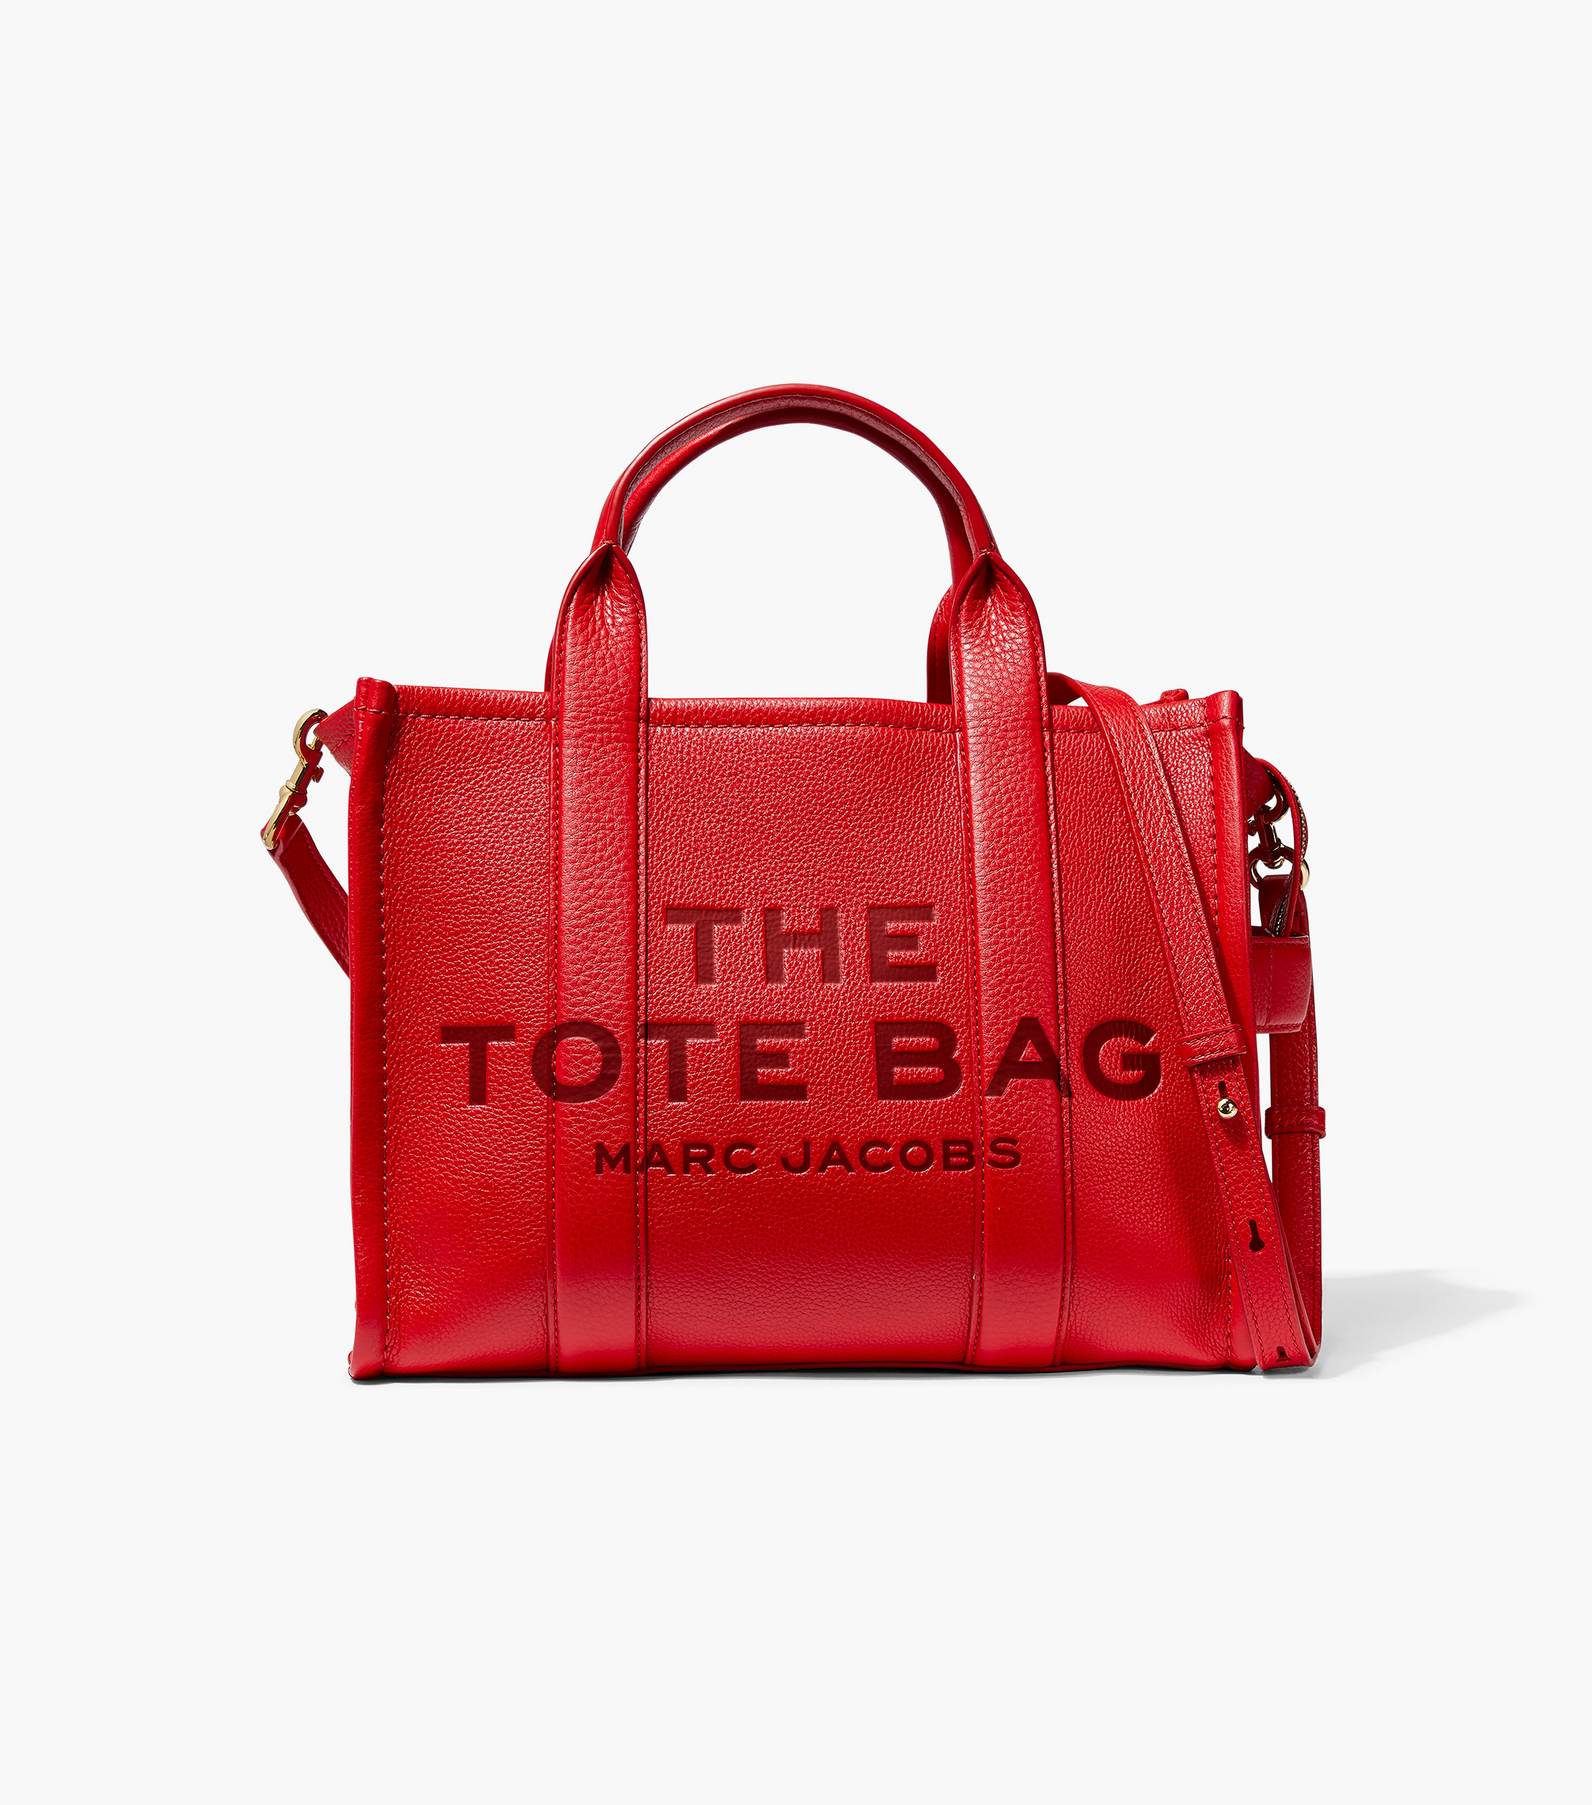 Marc Jacobs Tote Bage